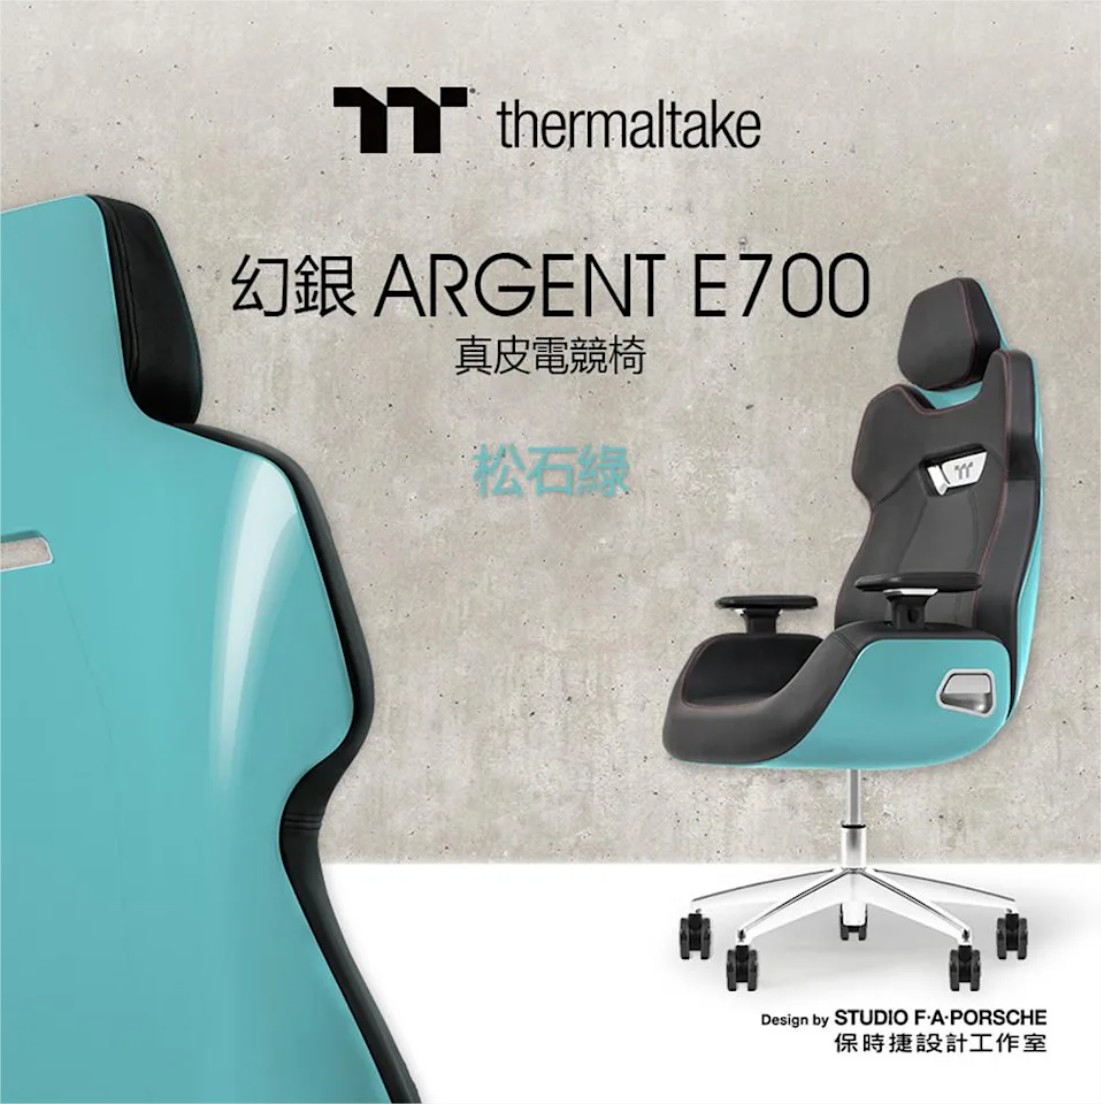 Thermaltake Argent E700 Turquoise